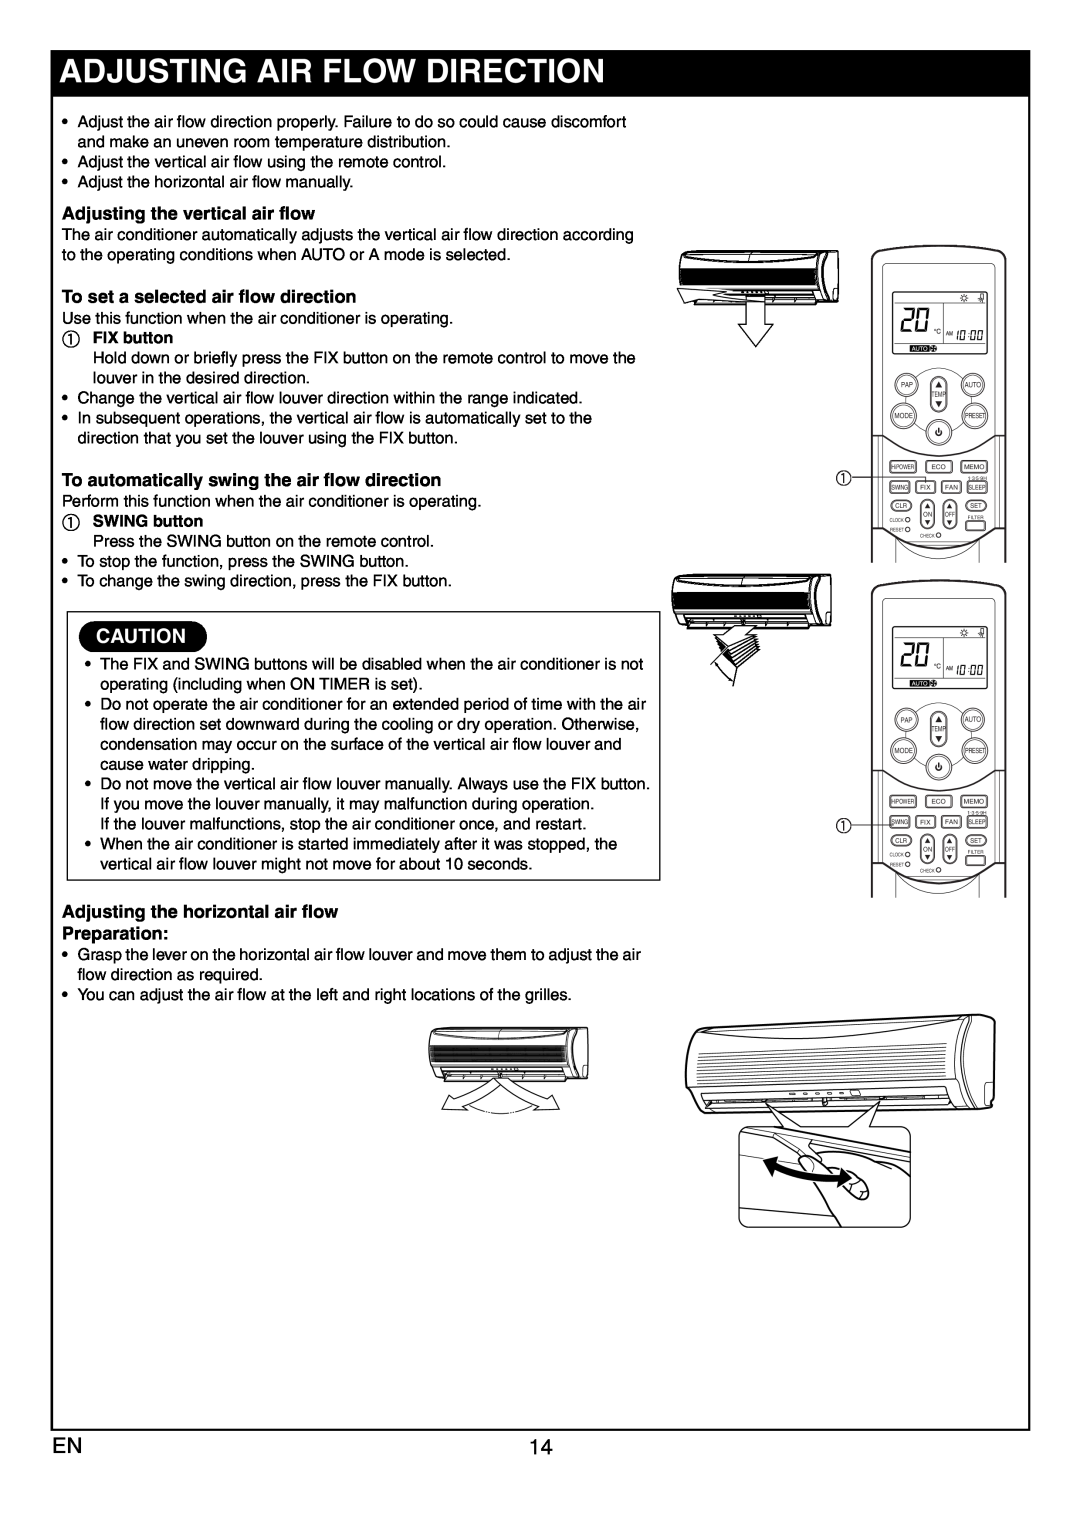 Toshiba RAS-10JAVP-E Adjusting Air Flow Direction, Adjusting the vertical air flow, To set a selected air flow direction 